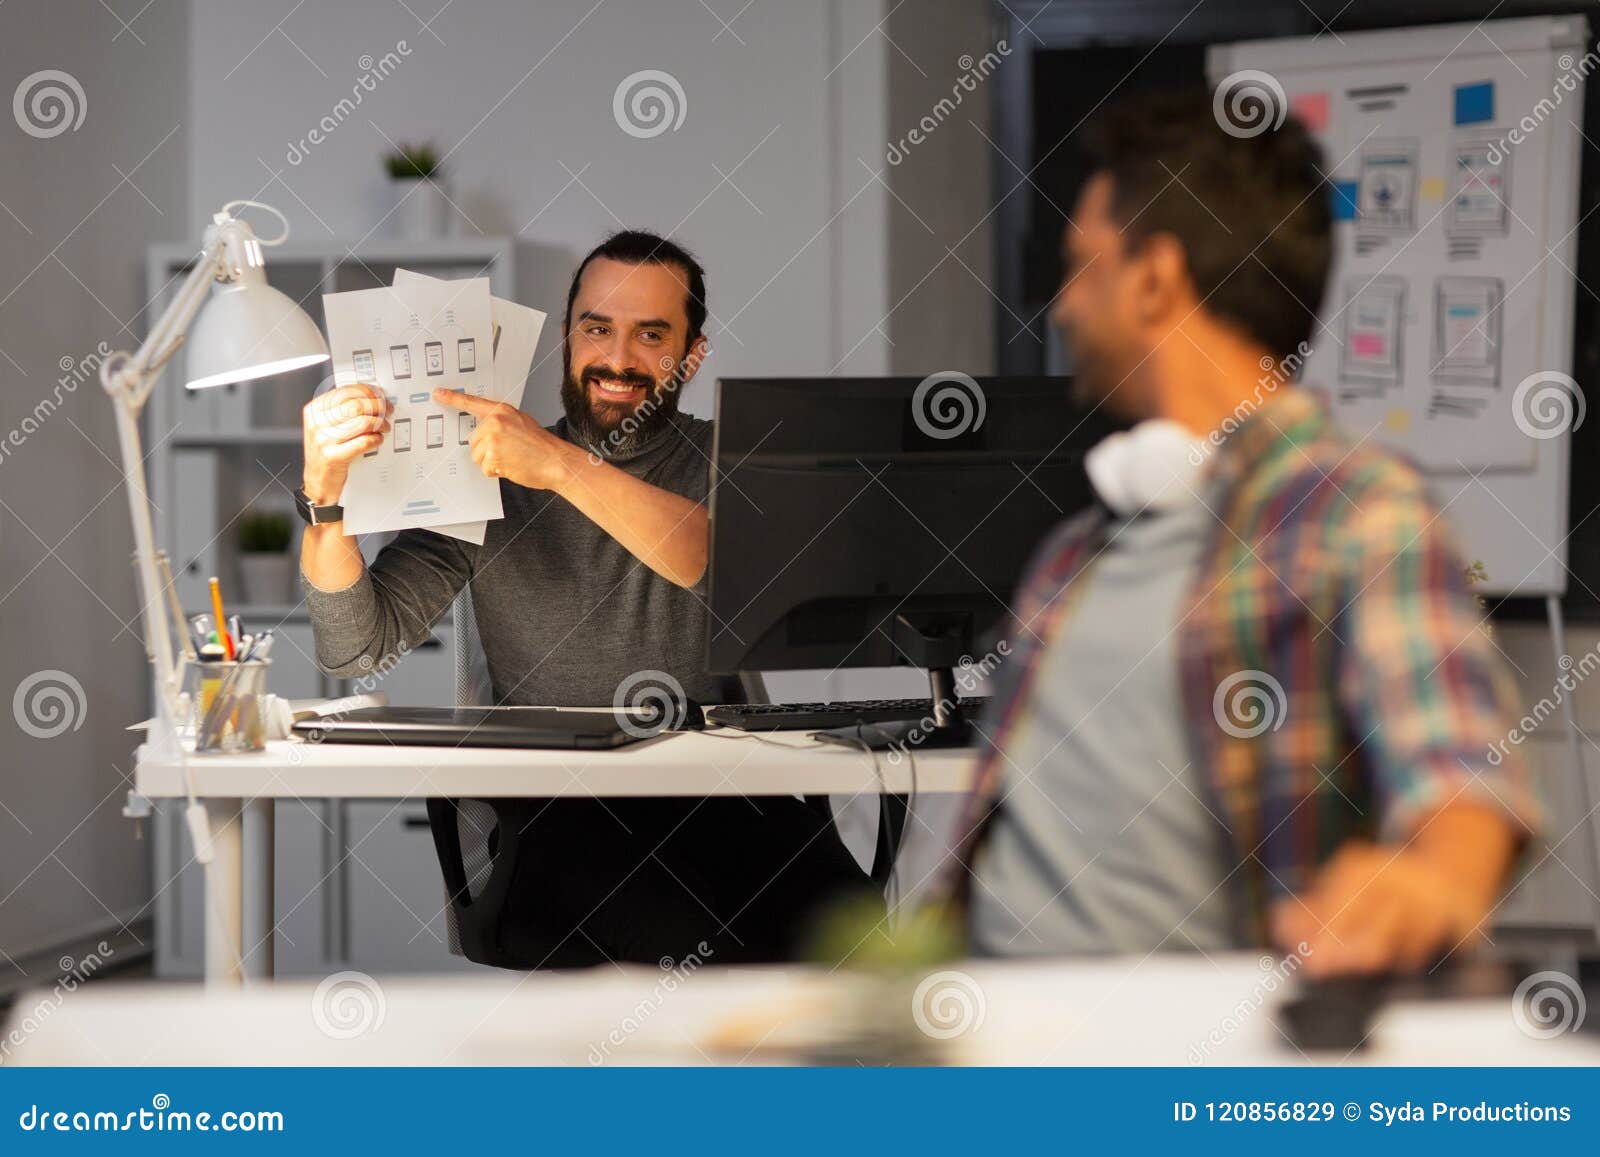 Creative Man Showing Papers To Colleague At Office Stock Image